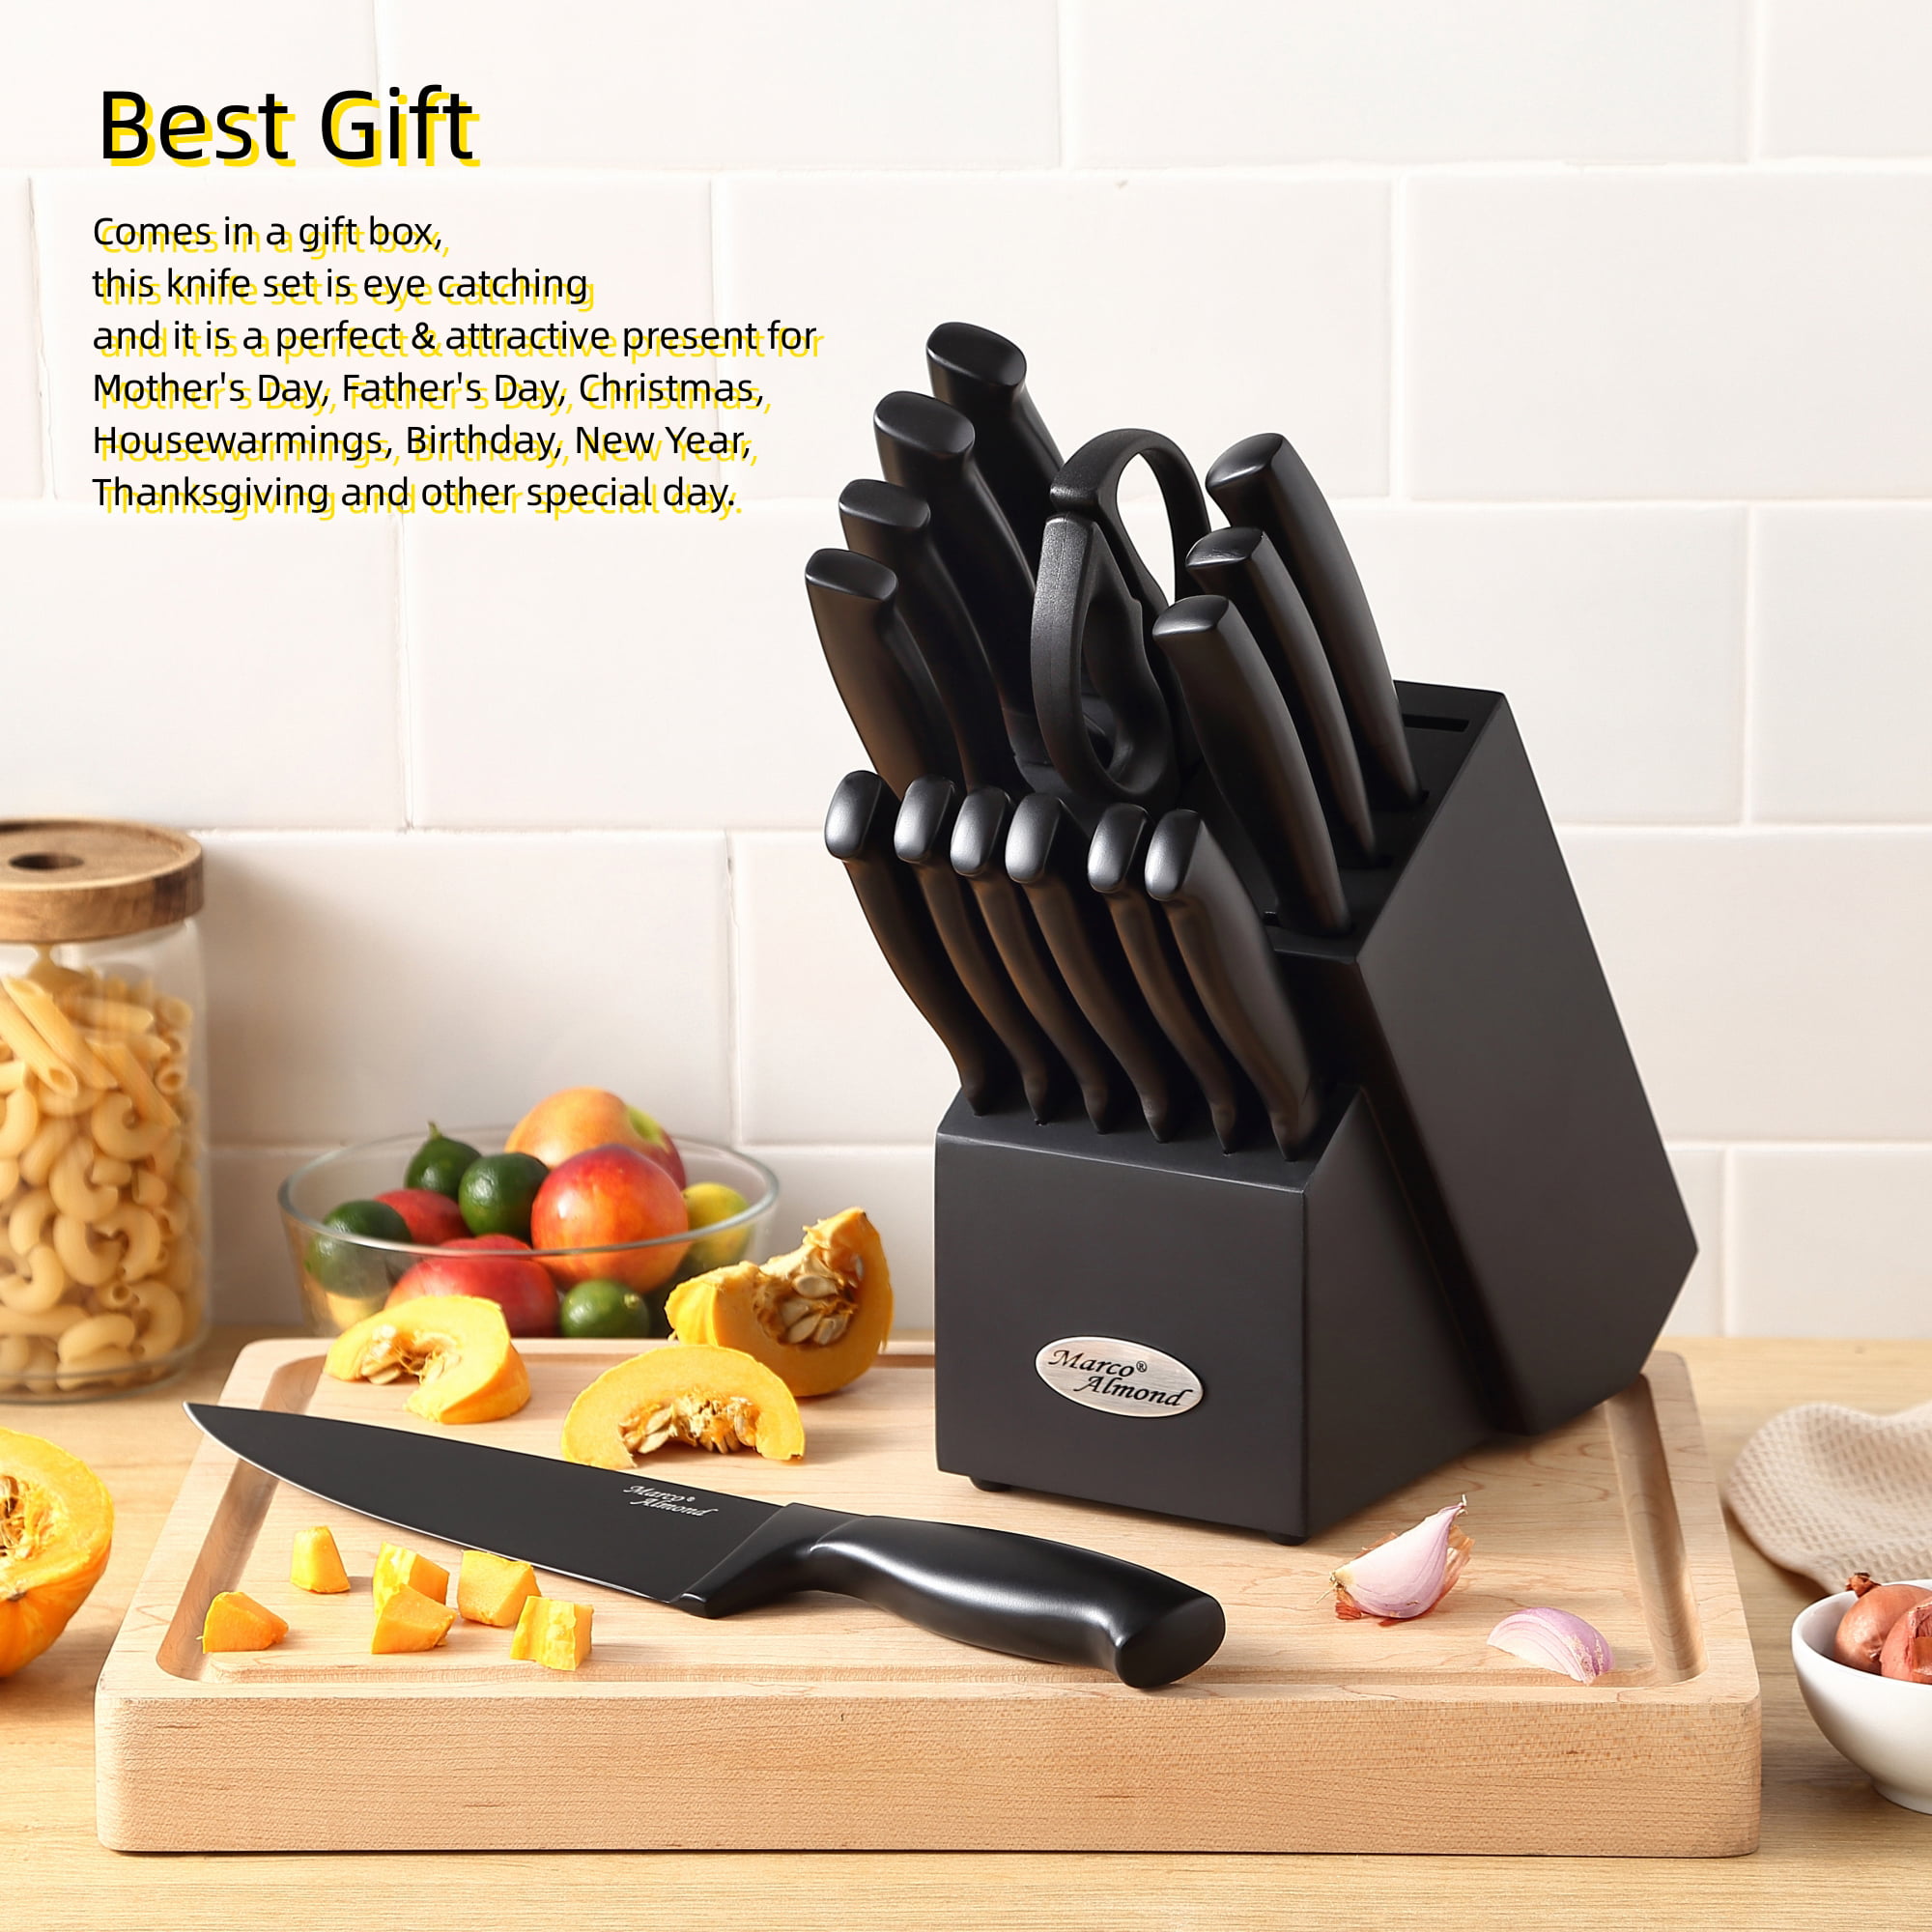 Marco Almond MA22 Knife Sets, 19 Pieces Stainless Steel Hollow Handle  Kitchen Knives Block Set